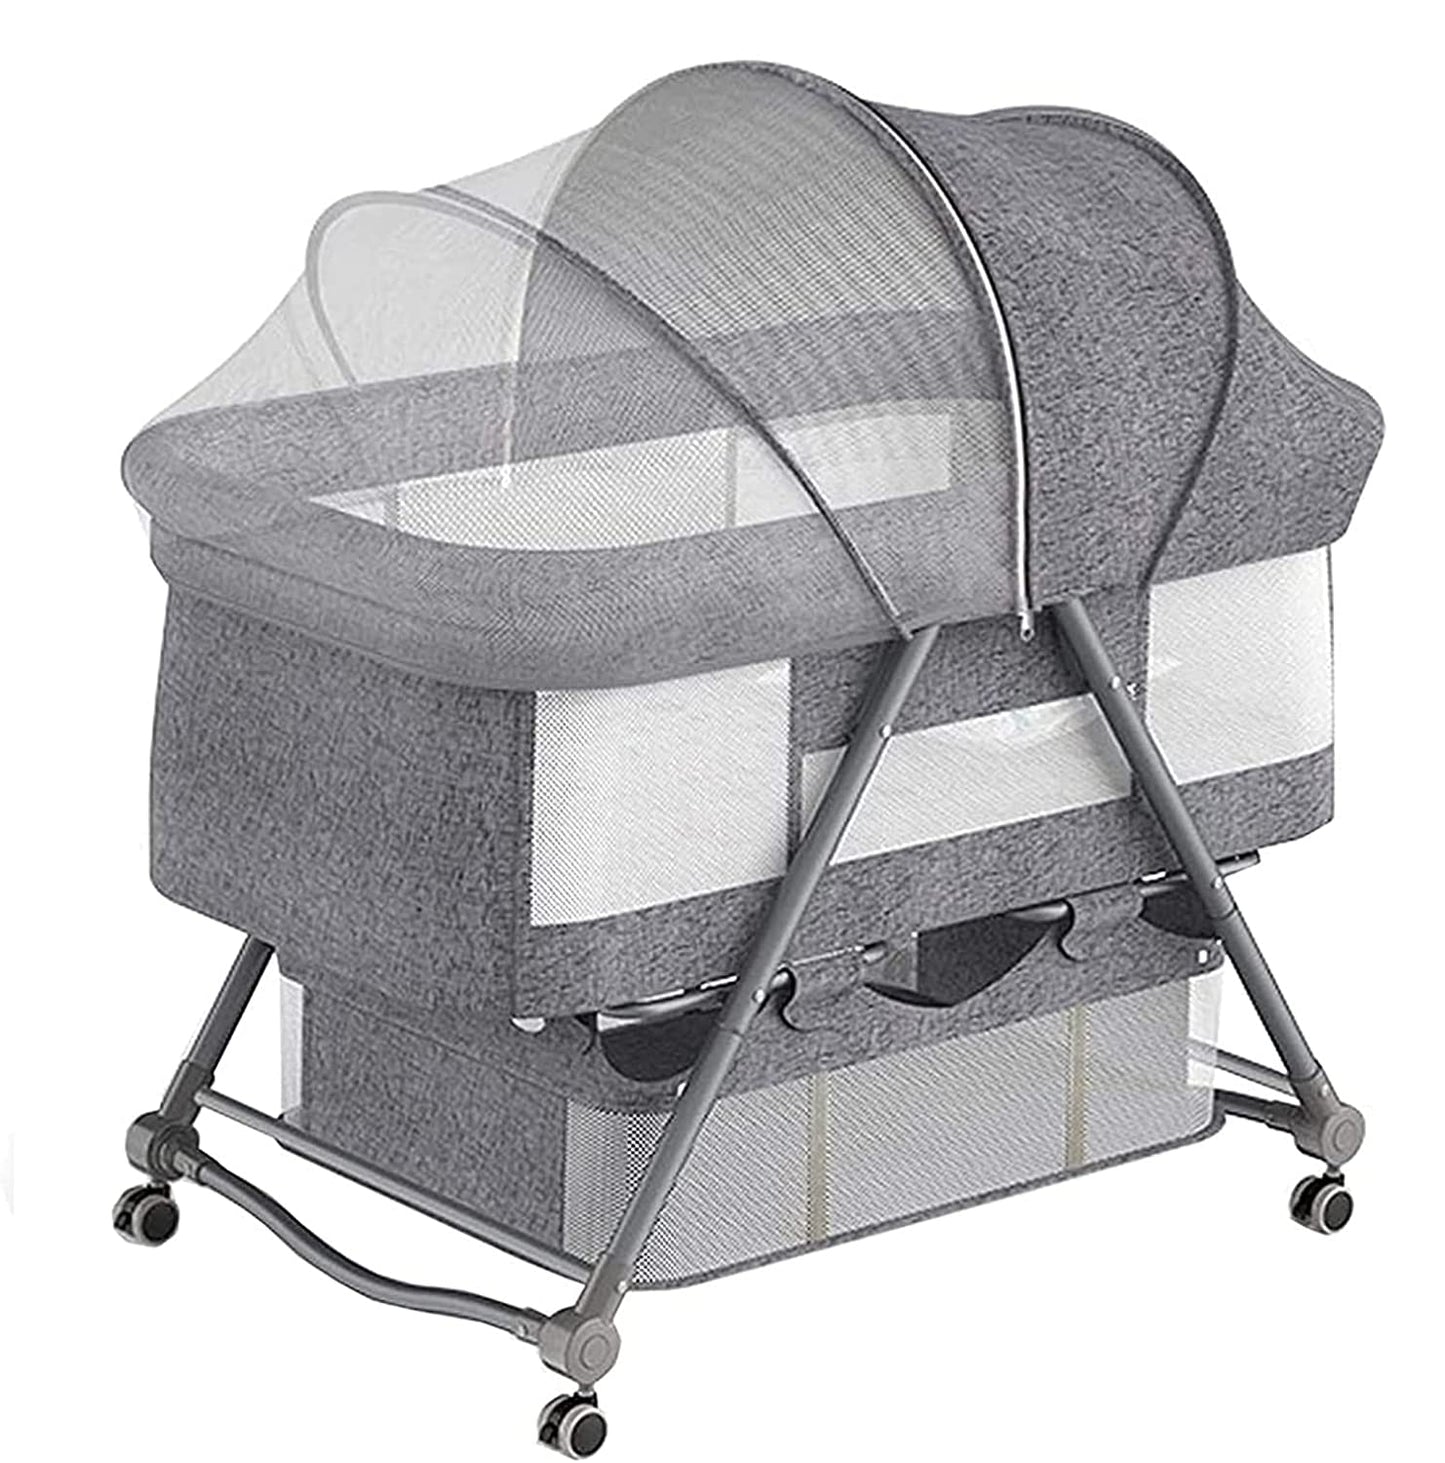 Cradle Crib Baby Rack, Foldable, Comes with Casters - Grey